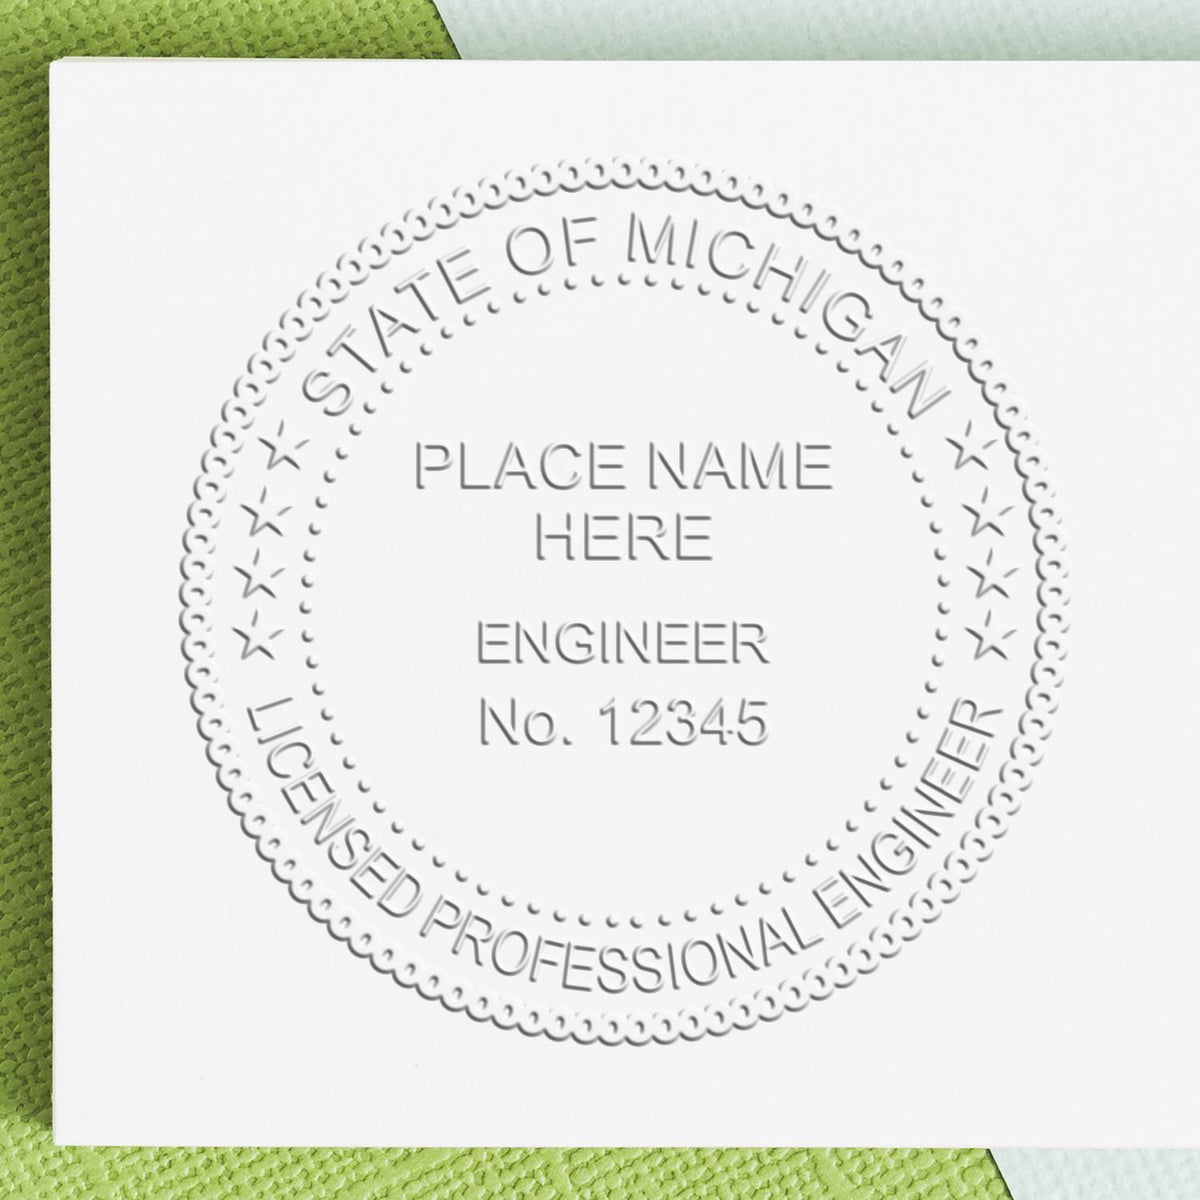 A stamped impression of the Michigan Engineer Desk Seal in this stylish lifestyle photo, setting the tone for a unique and personalized product.